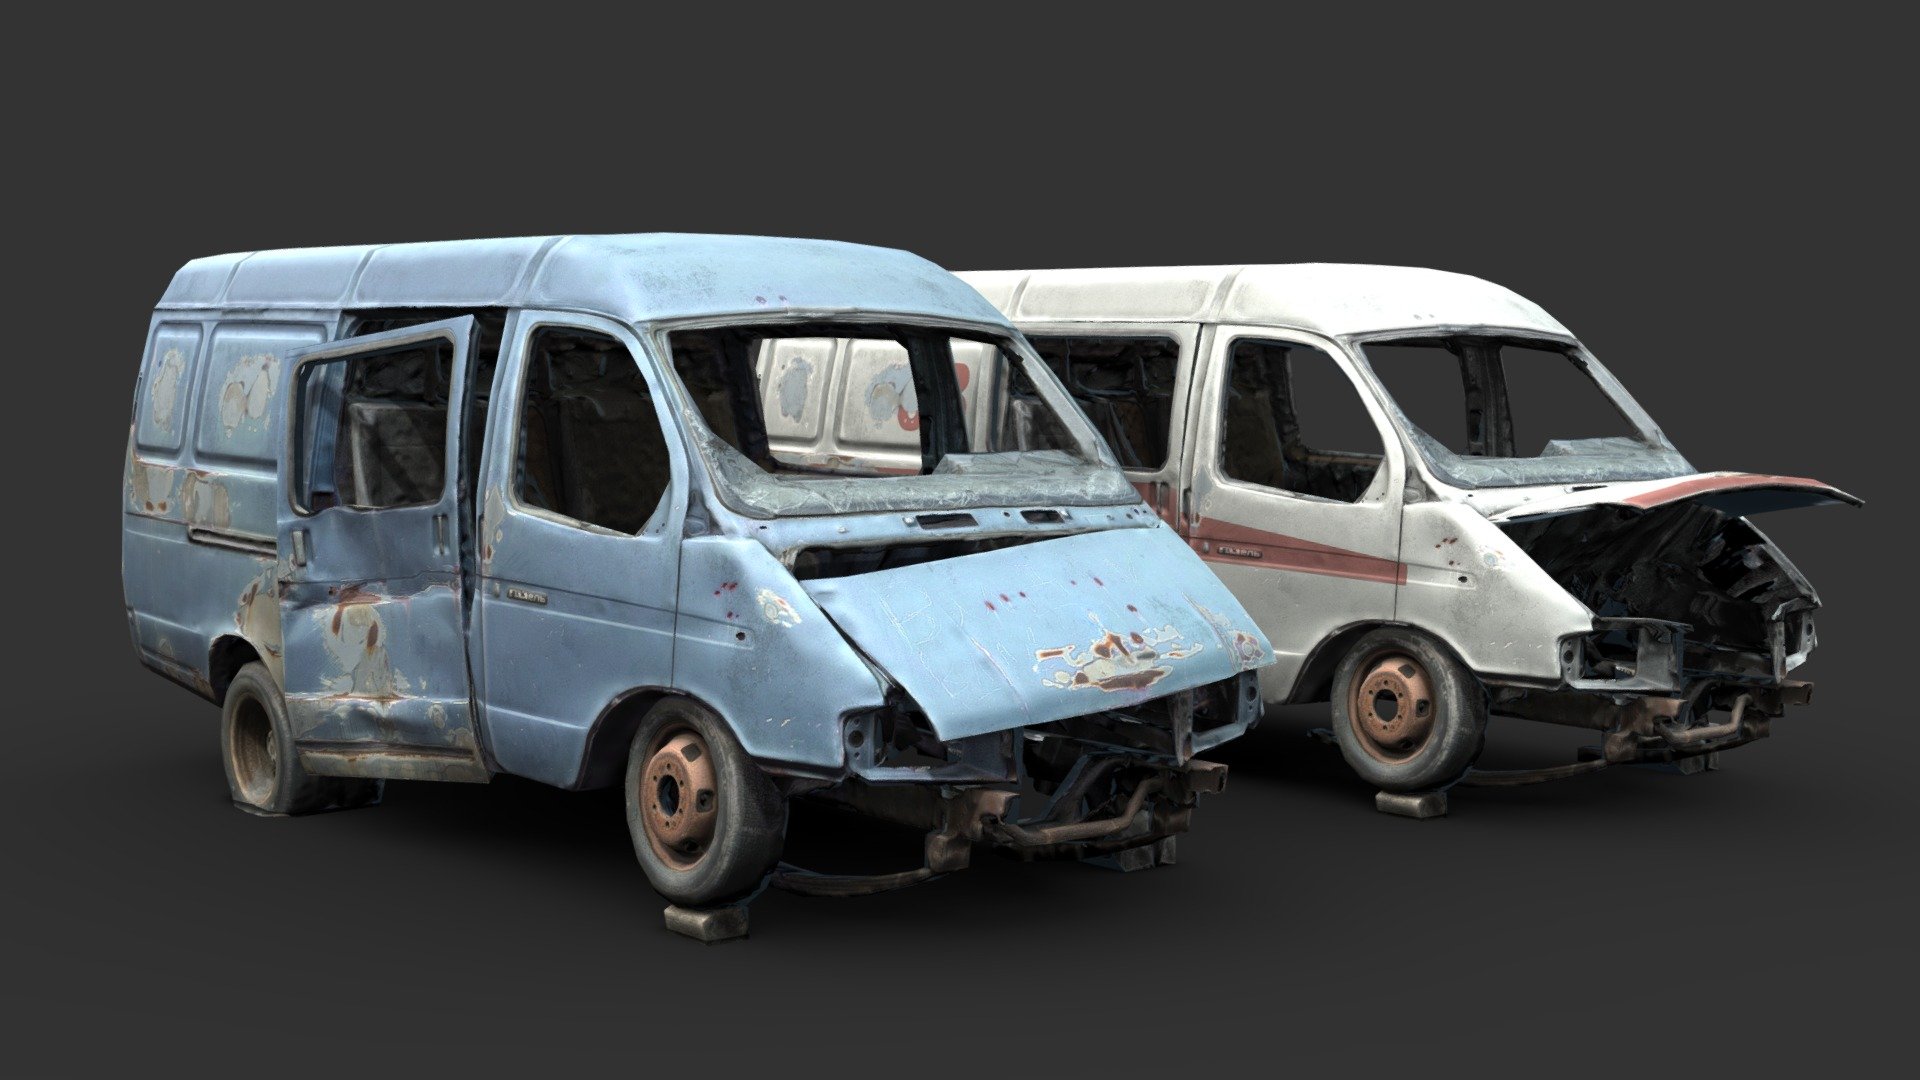 Post-apocalyptic version of a russian van/ambulance, made from a scan provided by Rudavin

Made in 3DSMax and Substance Painter 3d model